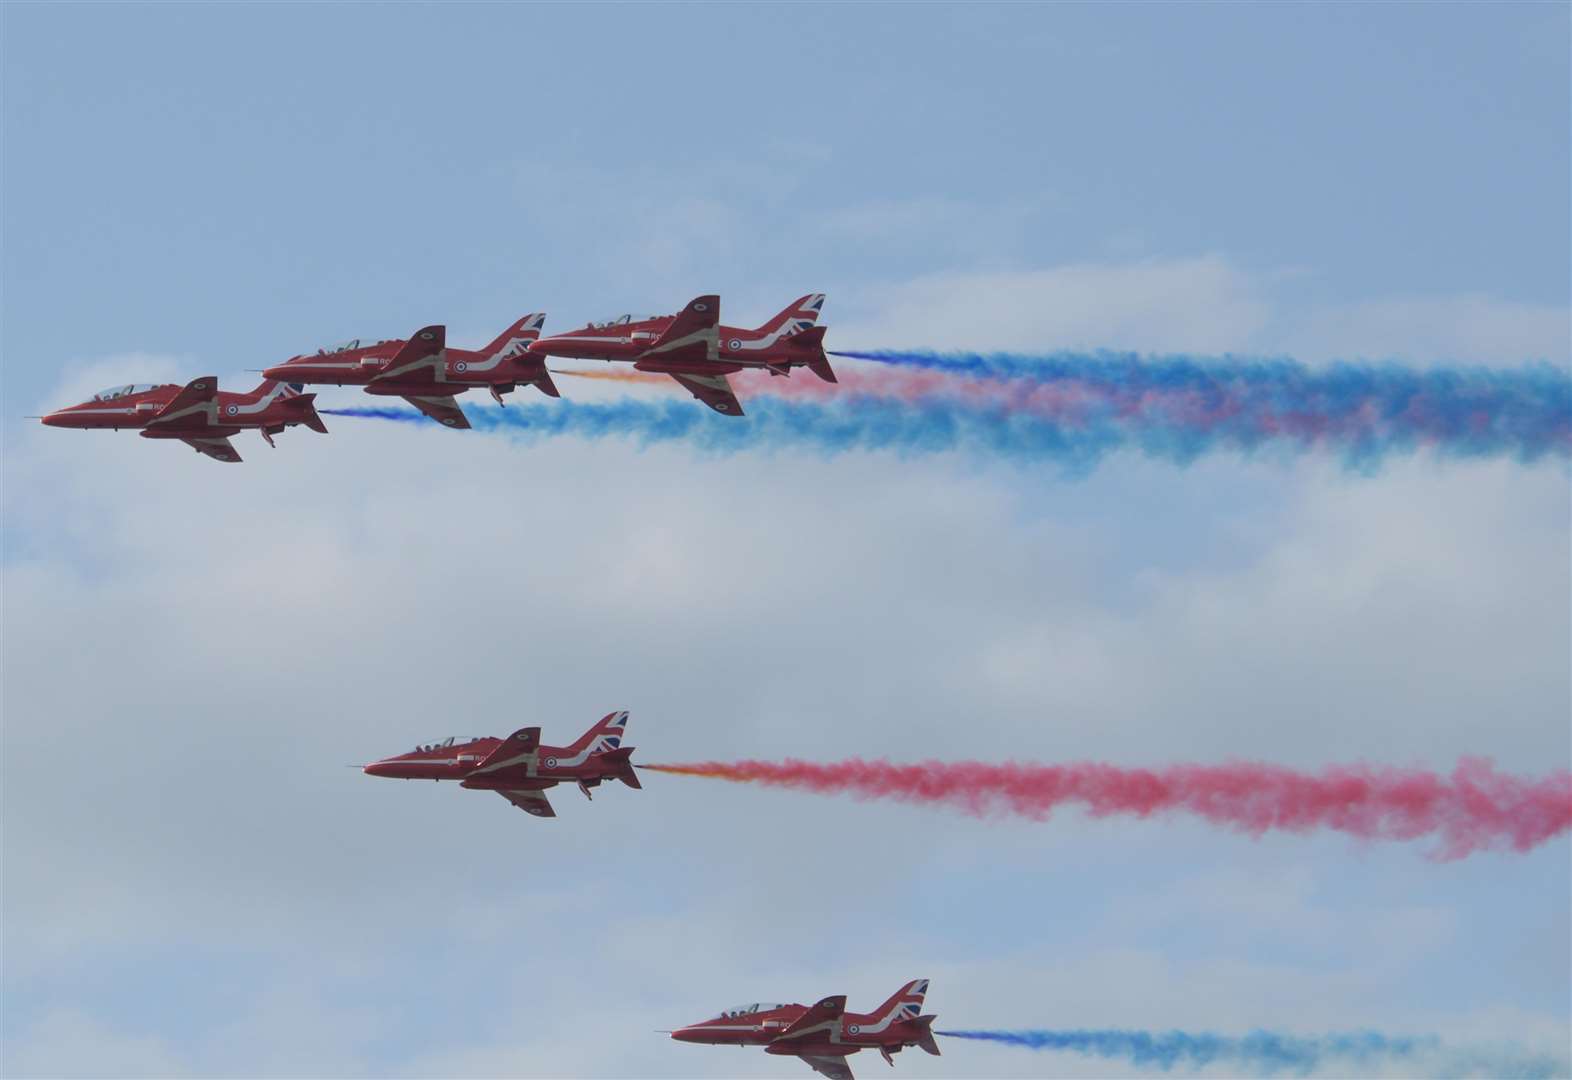 No Herne Bay air show in 2019